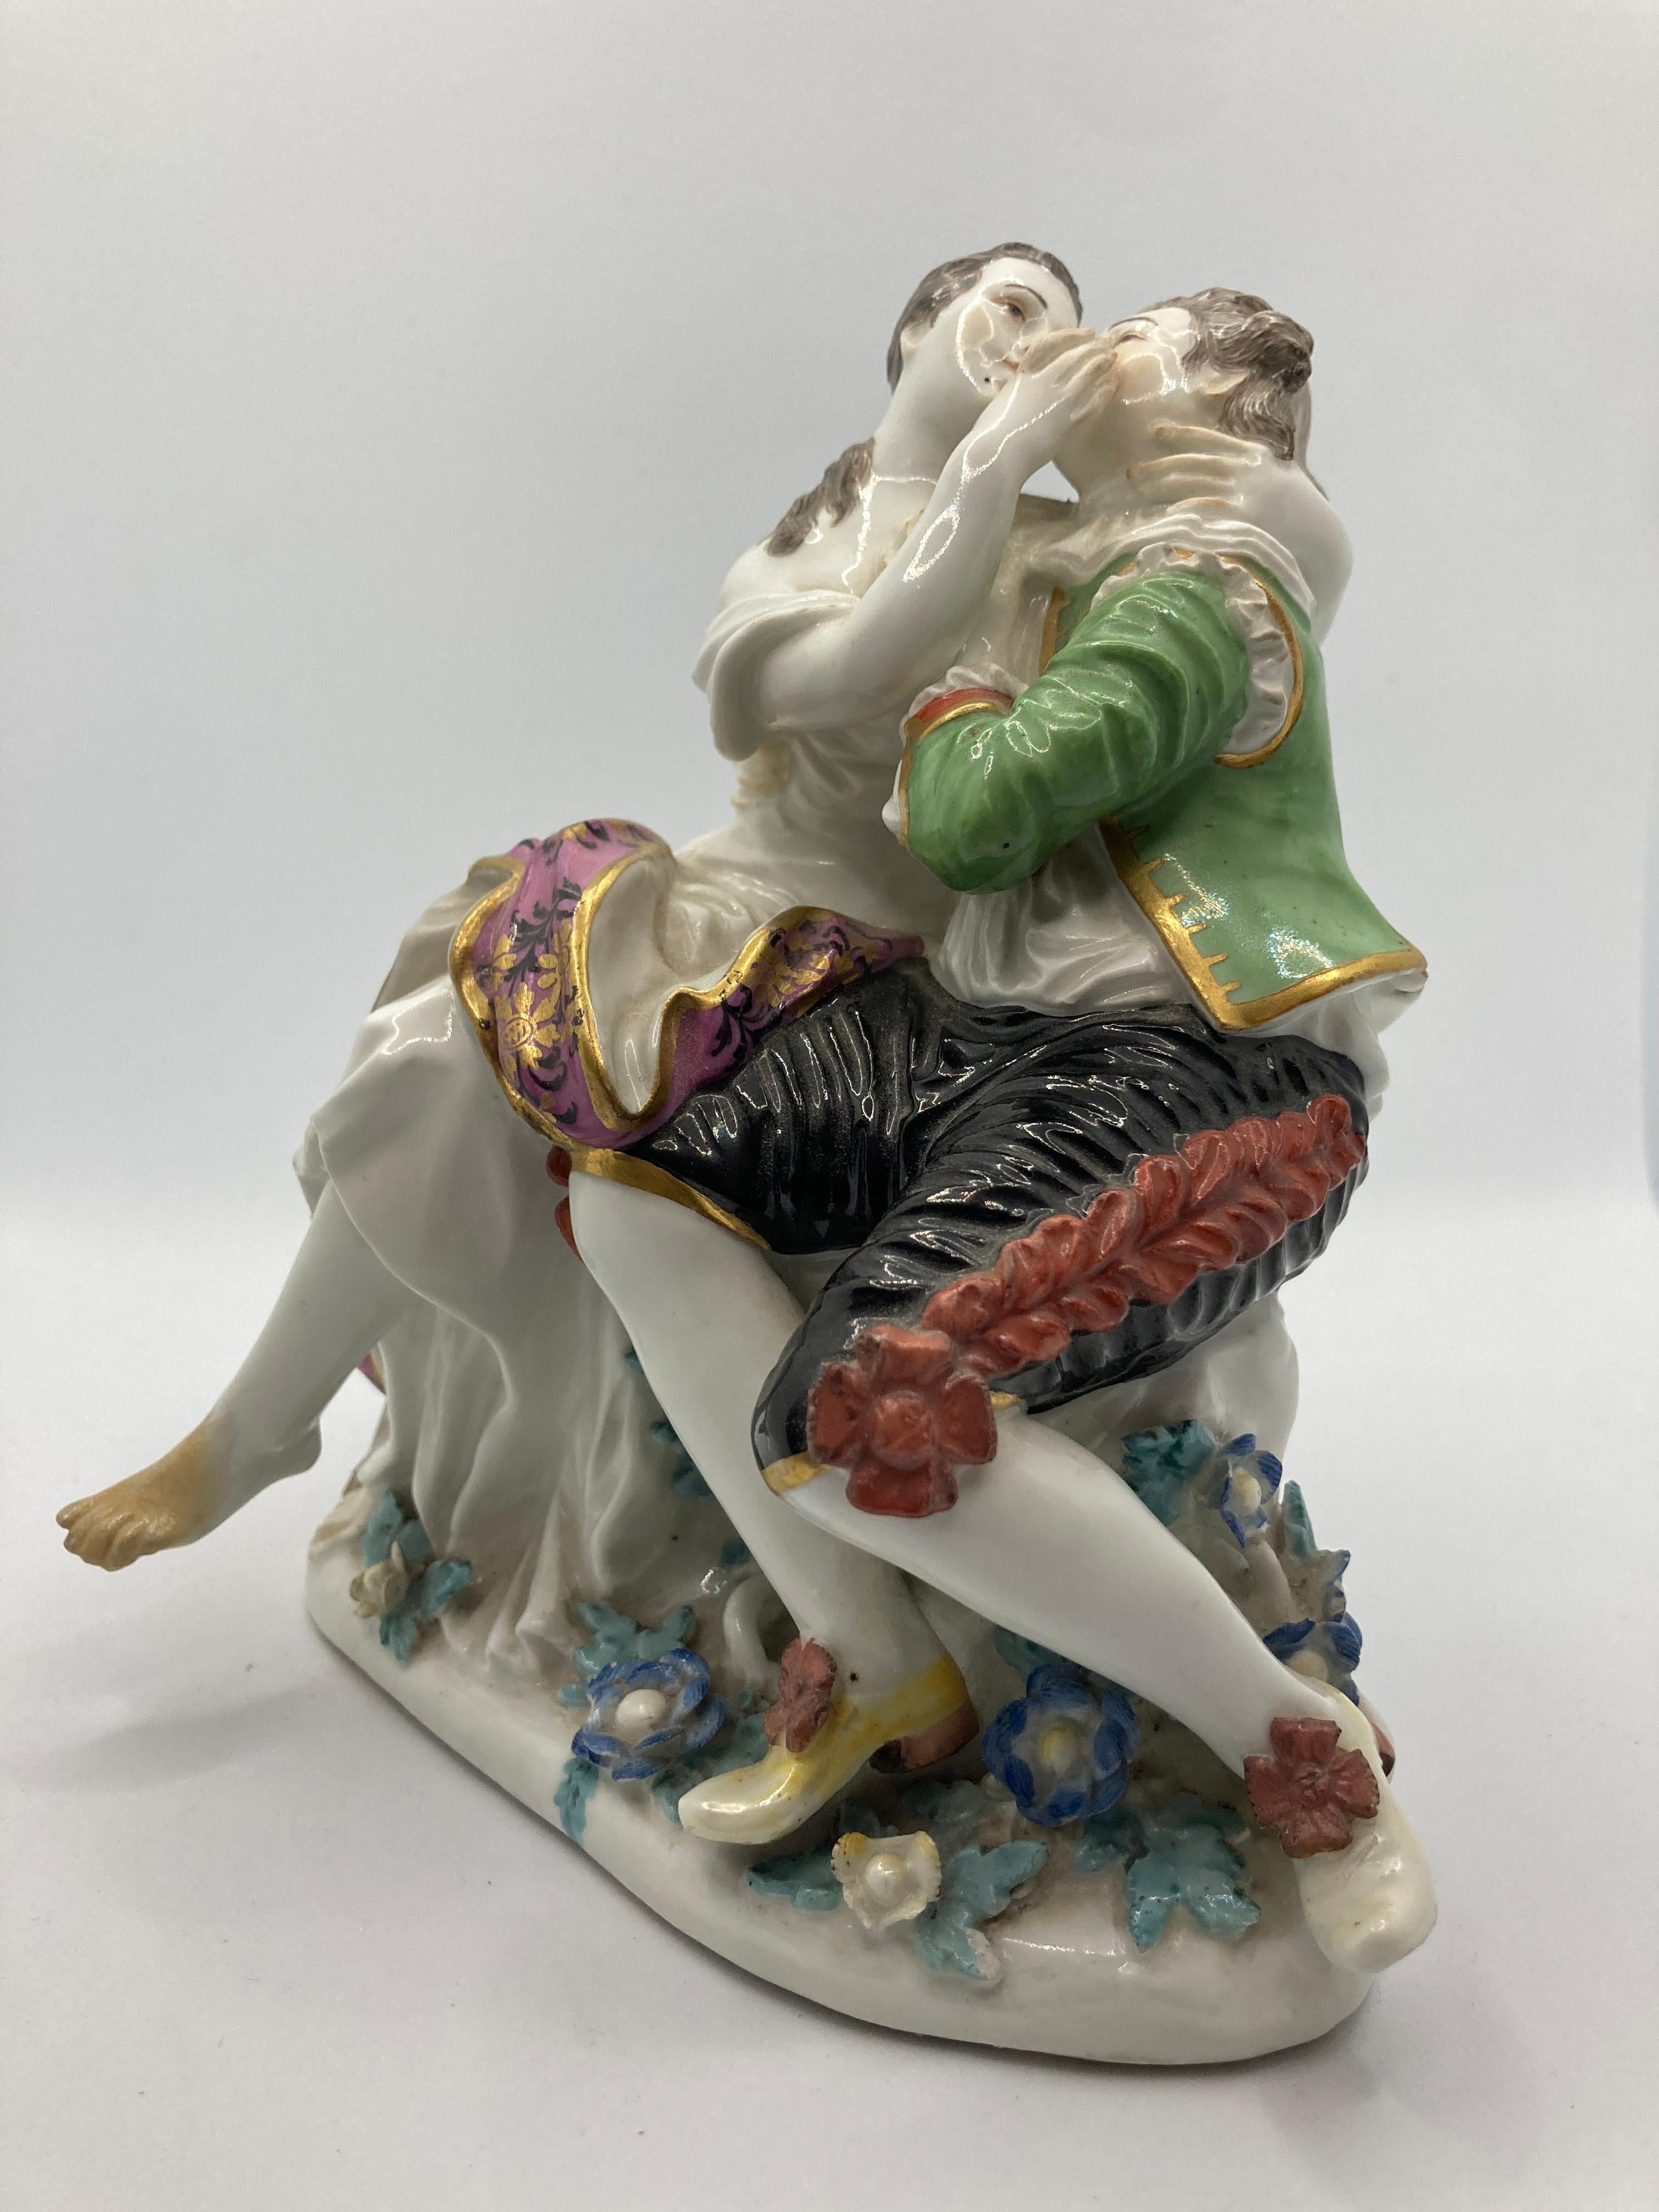 18th Century Meissen Porcelain Figurines, Pair of Lovers. Model 571. 

Sitting lovers, designed by Johann Joachim Kaendler, above a base covered with plastic flowers and leaves, shepherd couple sitting on a tree stump, kissing and embracing each